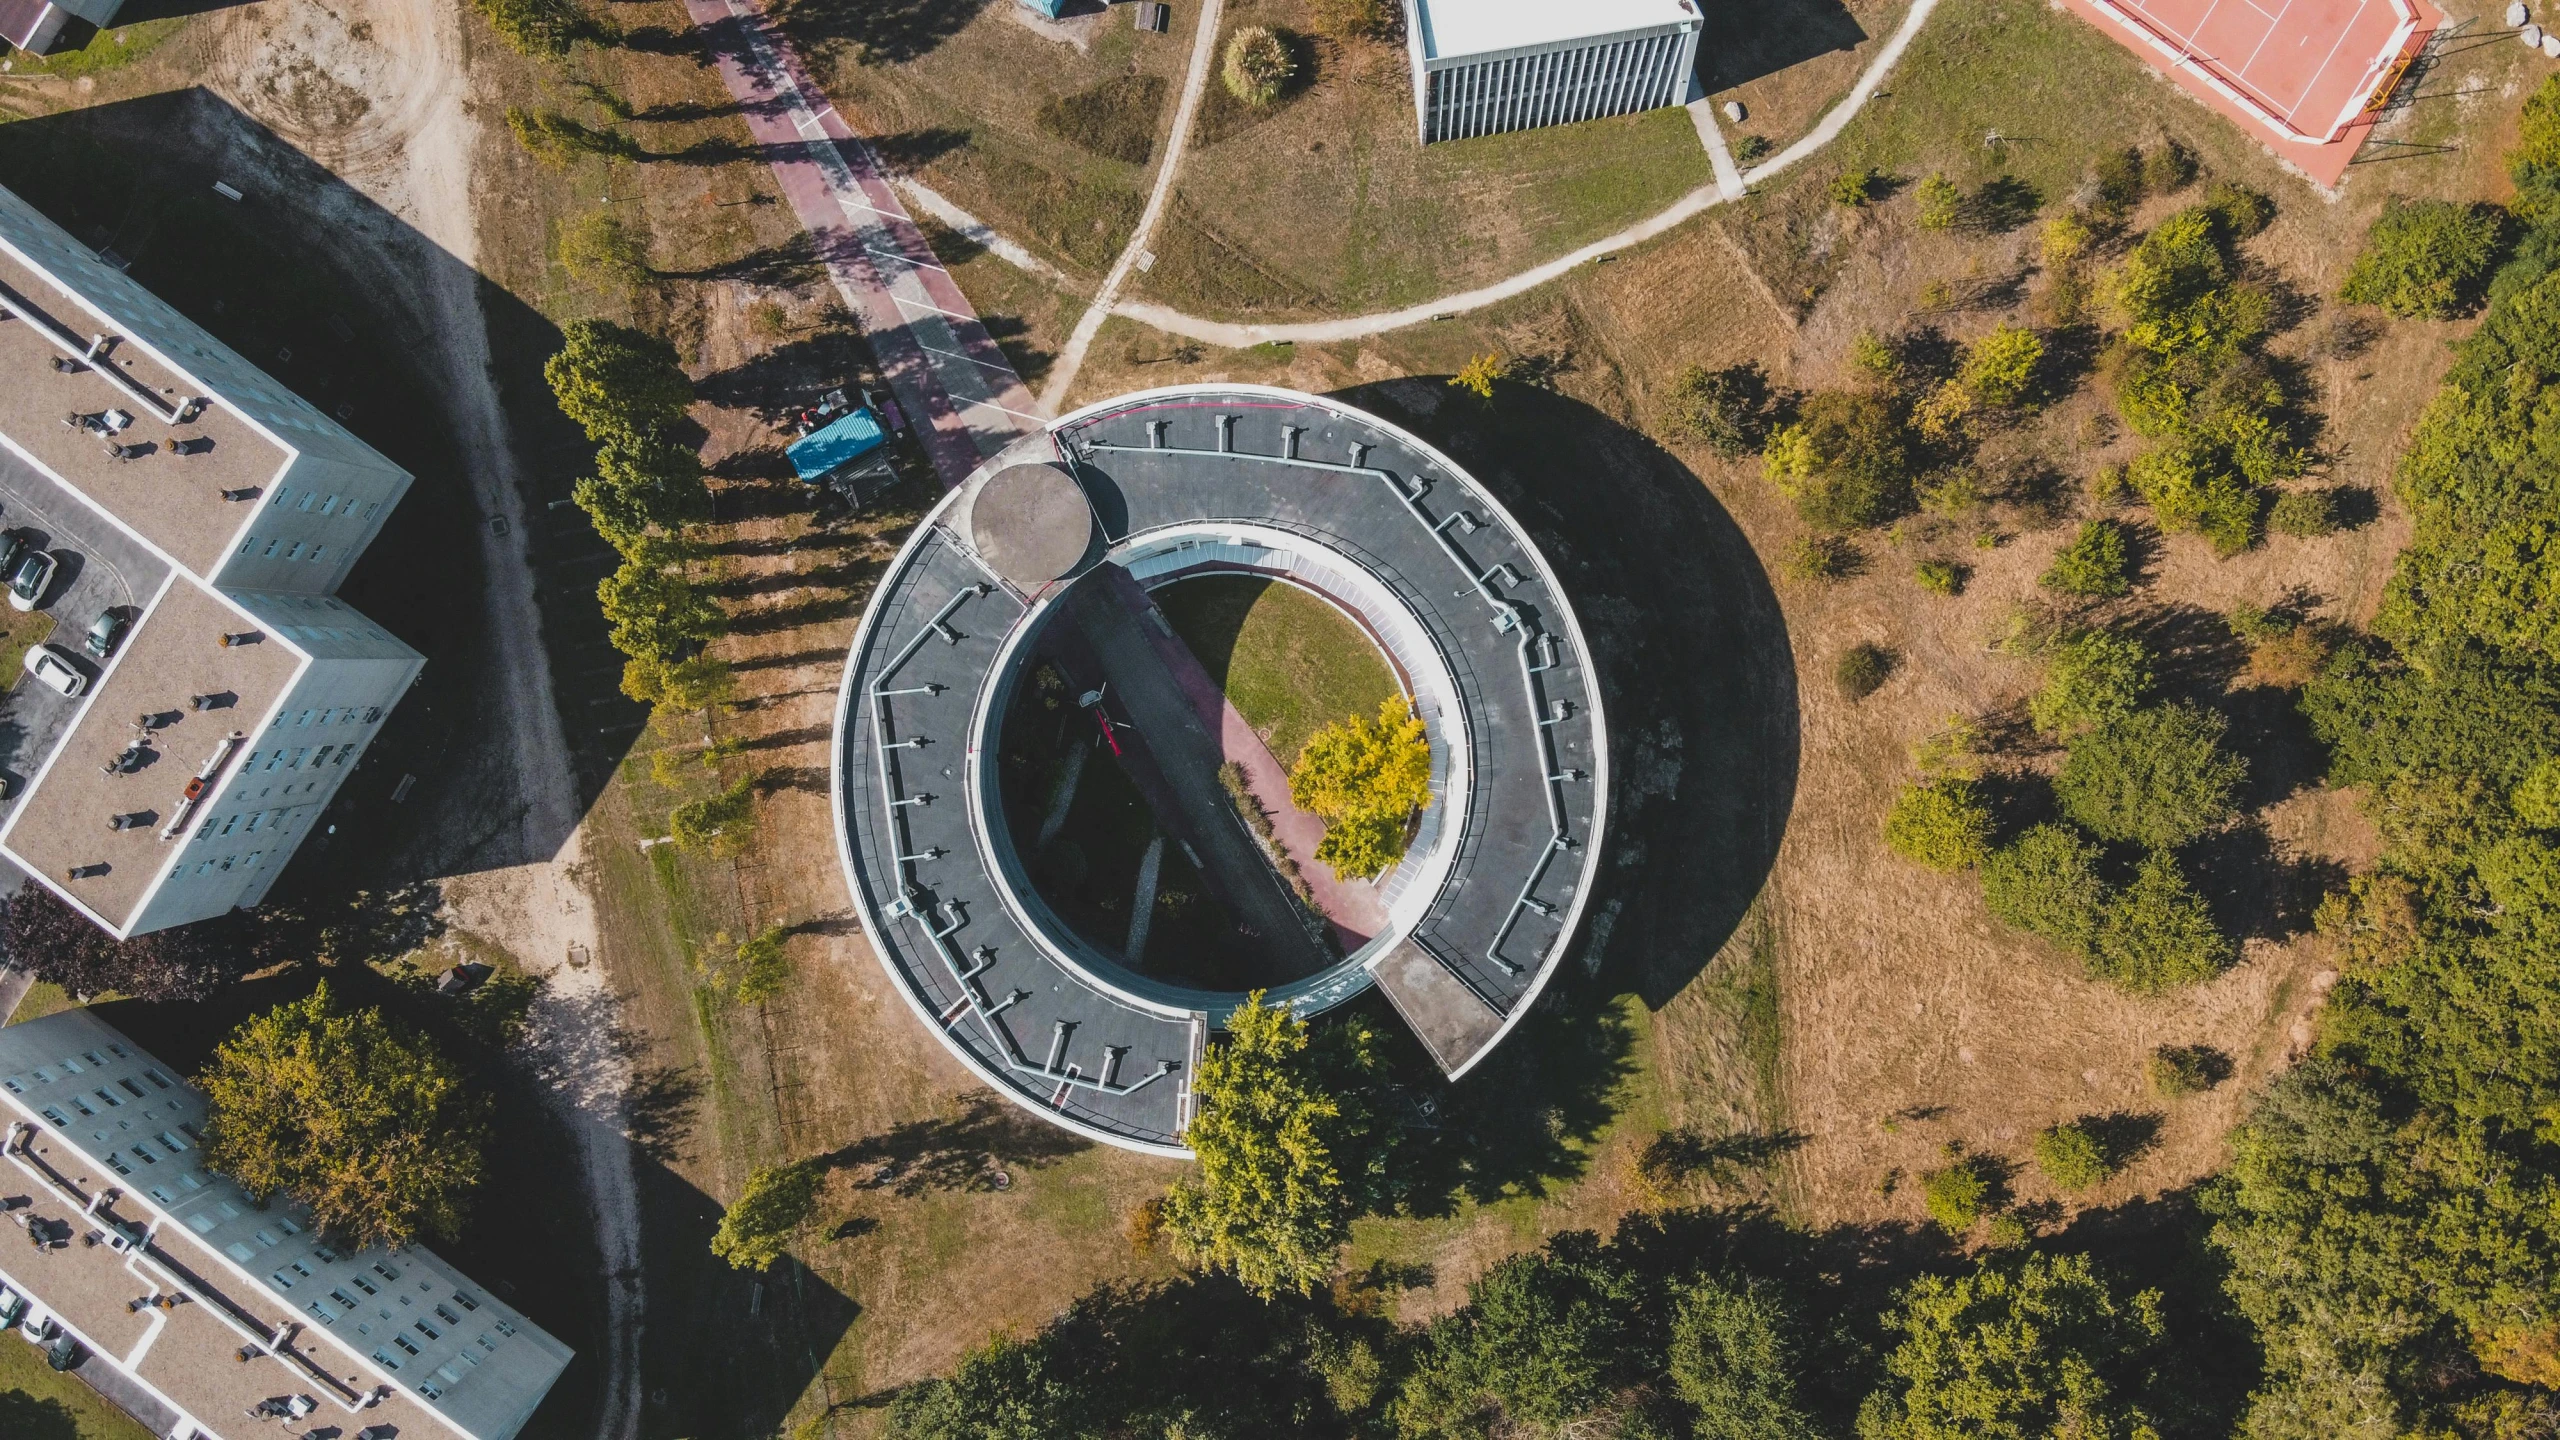 an aerial view of a building surrounded by trees, by Adam Marczyński, pexels contest winner, bauhaus, mobius strip shaped planet, ouroboros, school, museum photo